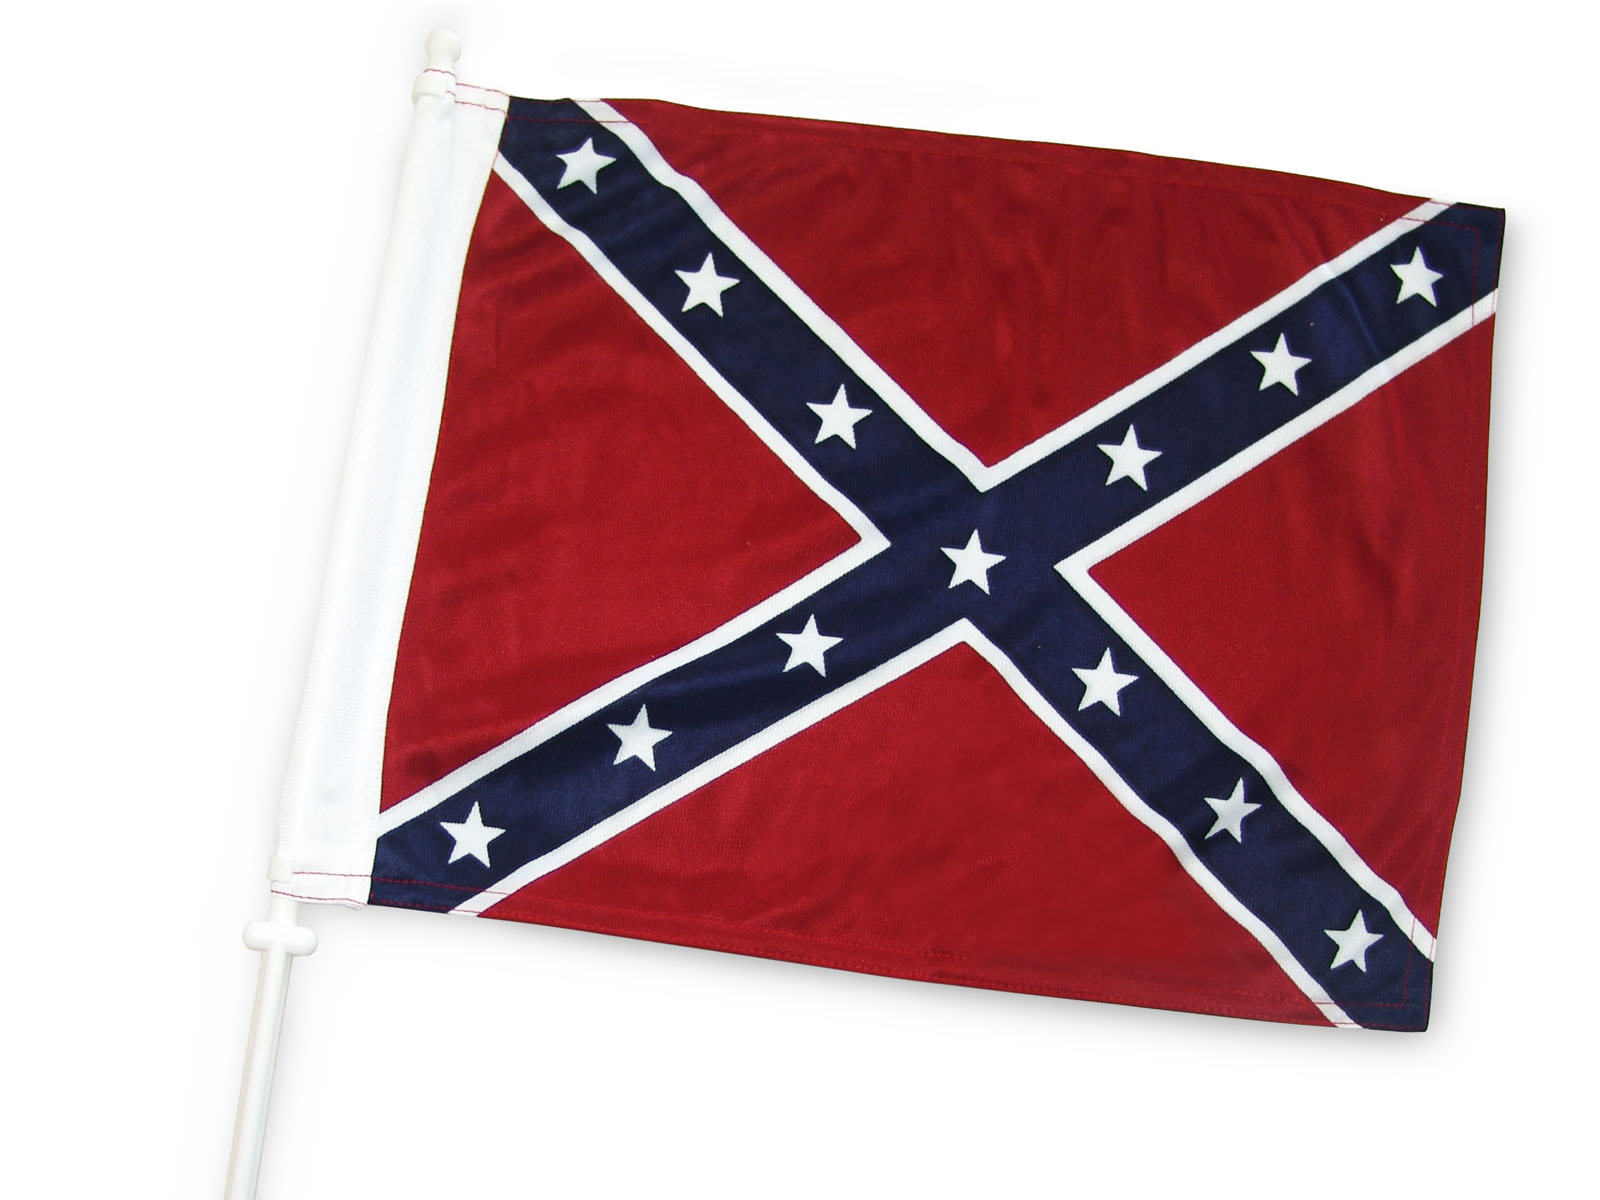 Read This Article The Texas Confederate Flag Wallpaper And Rebel